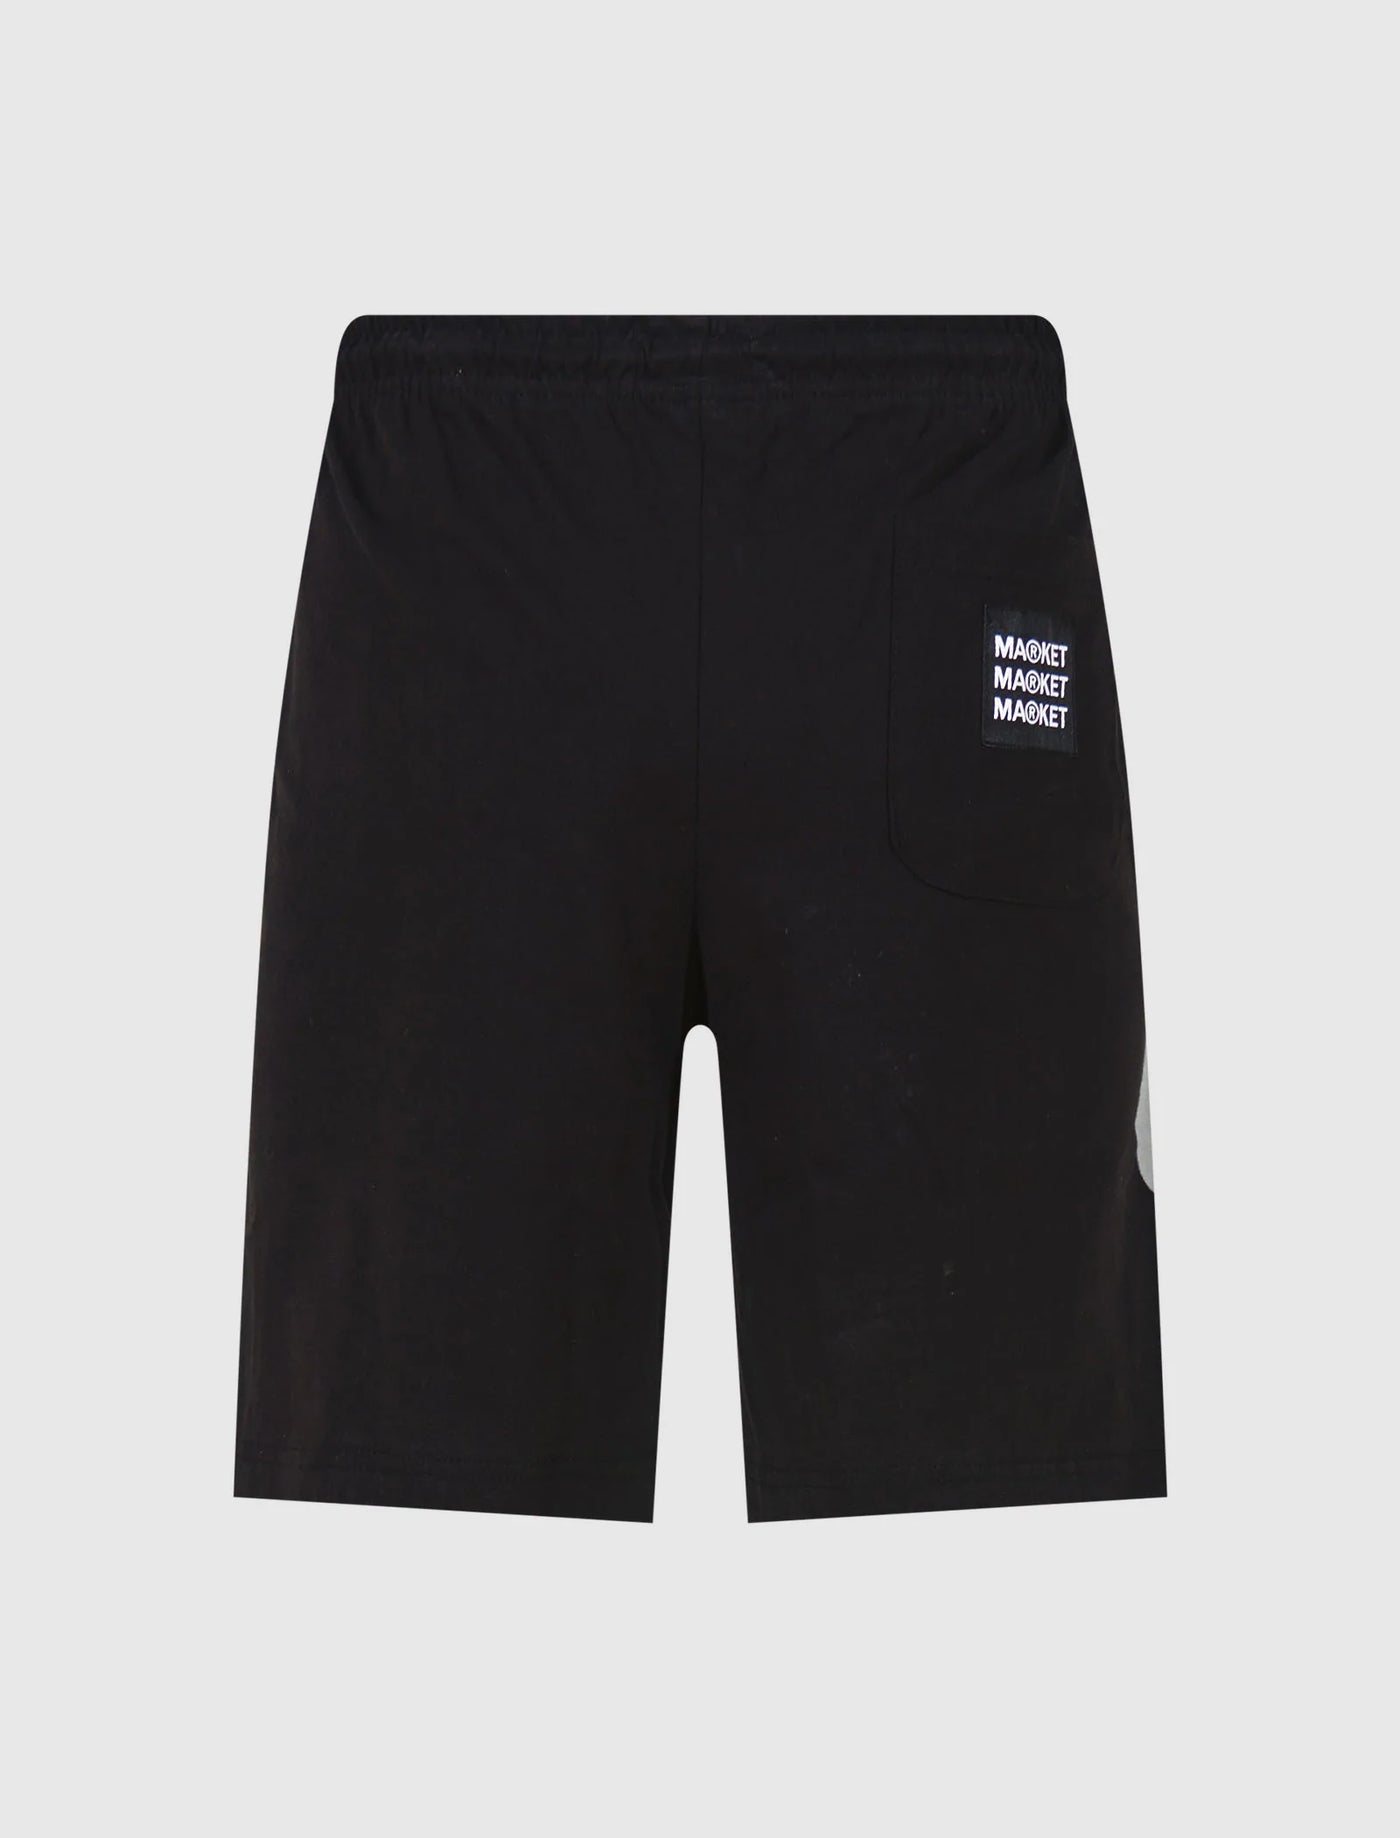 Market Smiley In The Net 3M Shorts Black